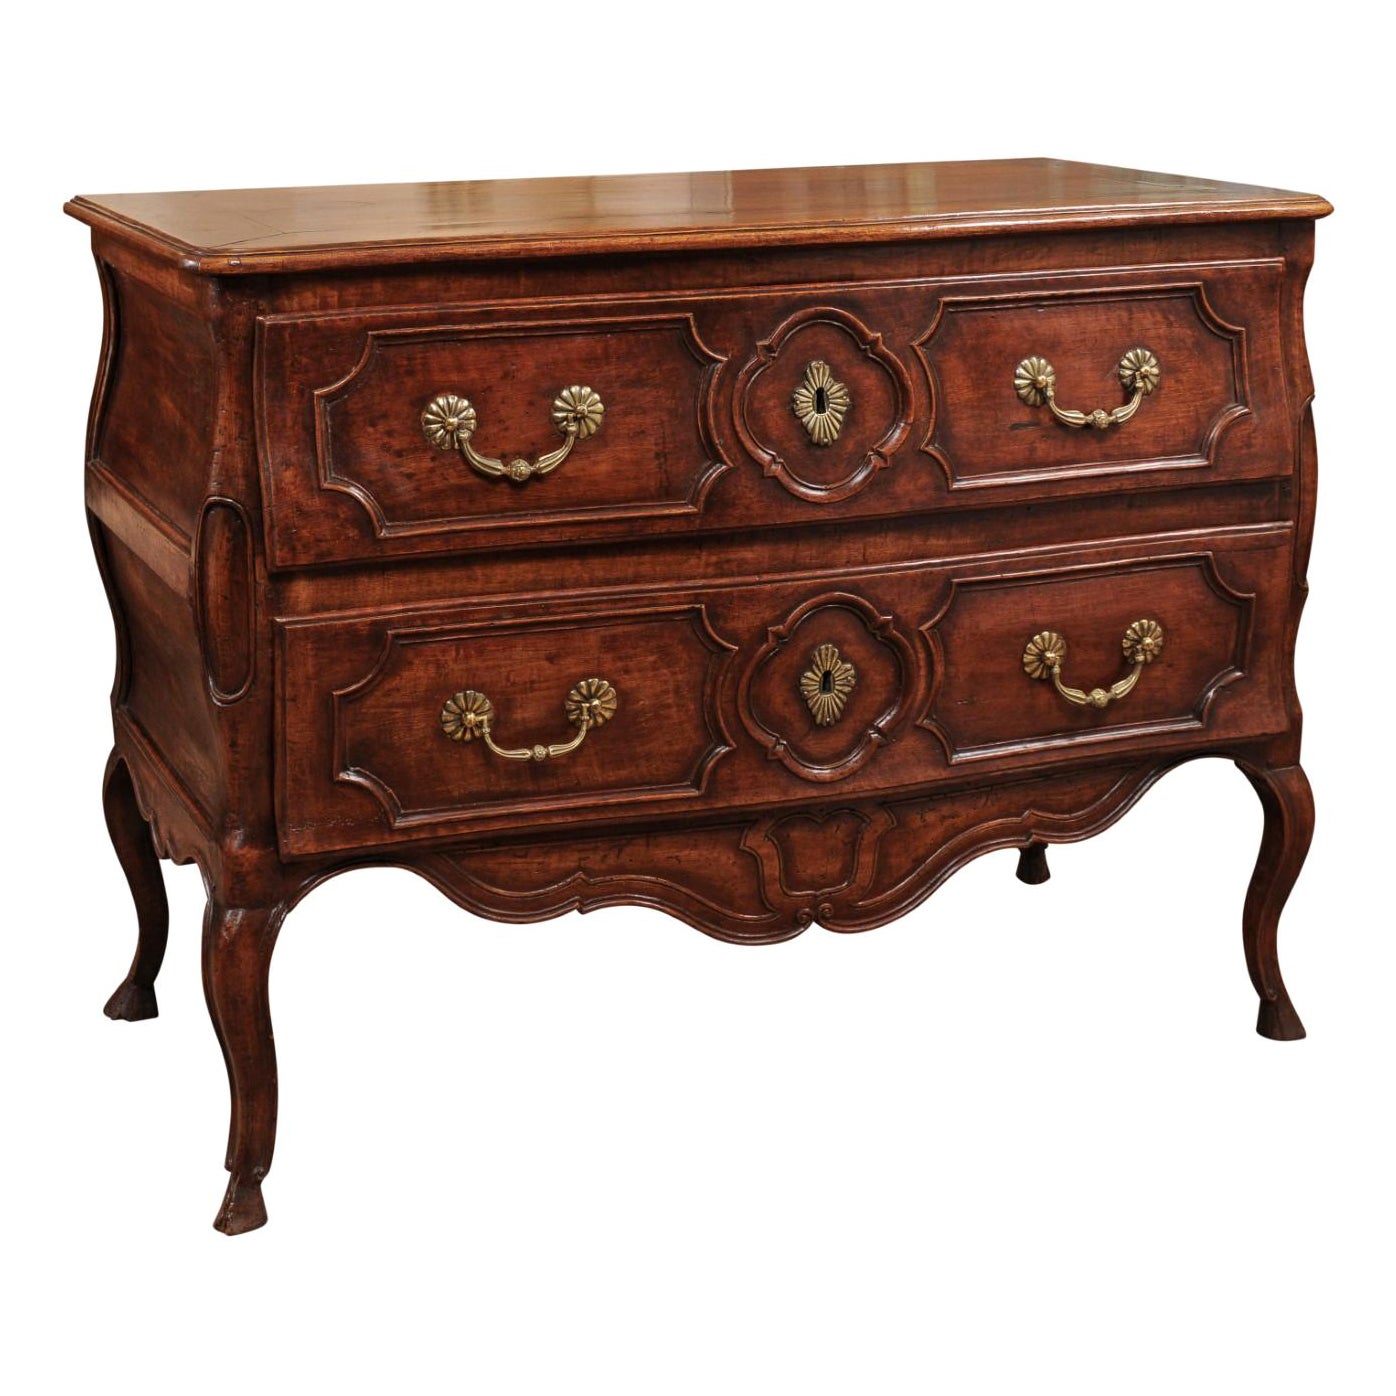 Mid-18th Century French Louis XV Walnut Commode with 2 Drawers, Cabriole Legs, & For Sale